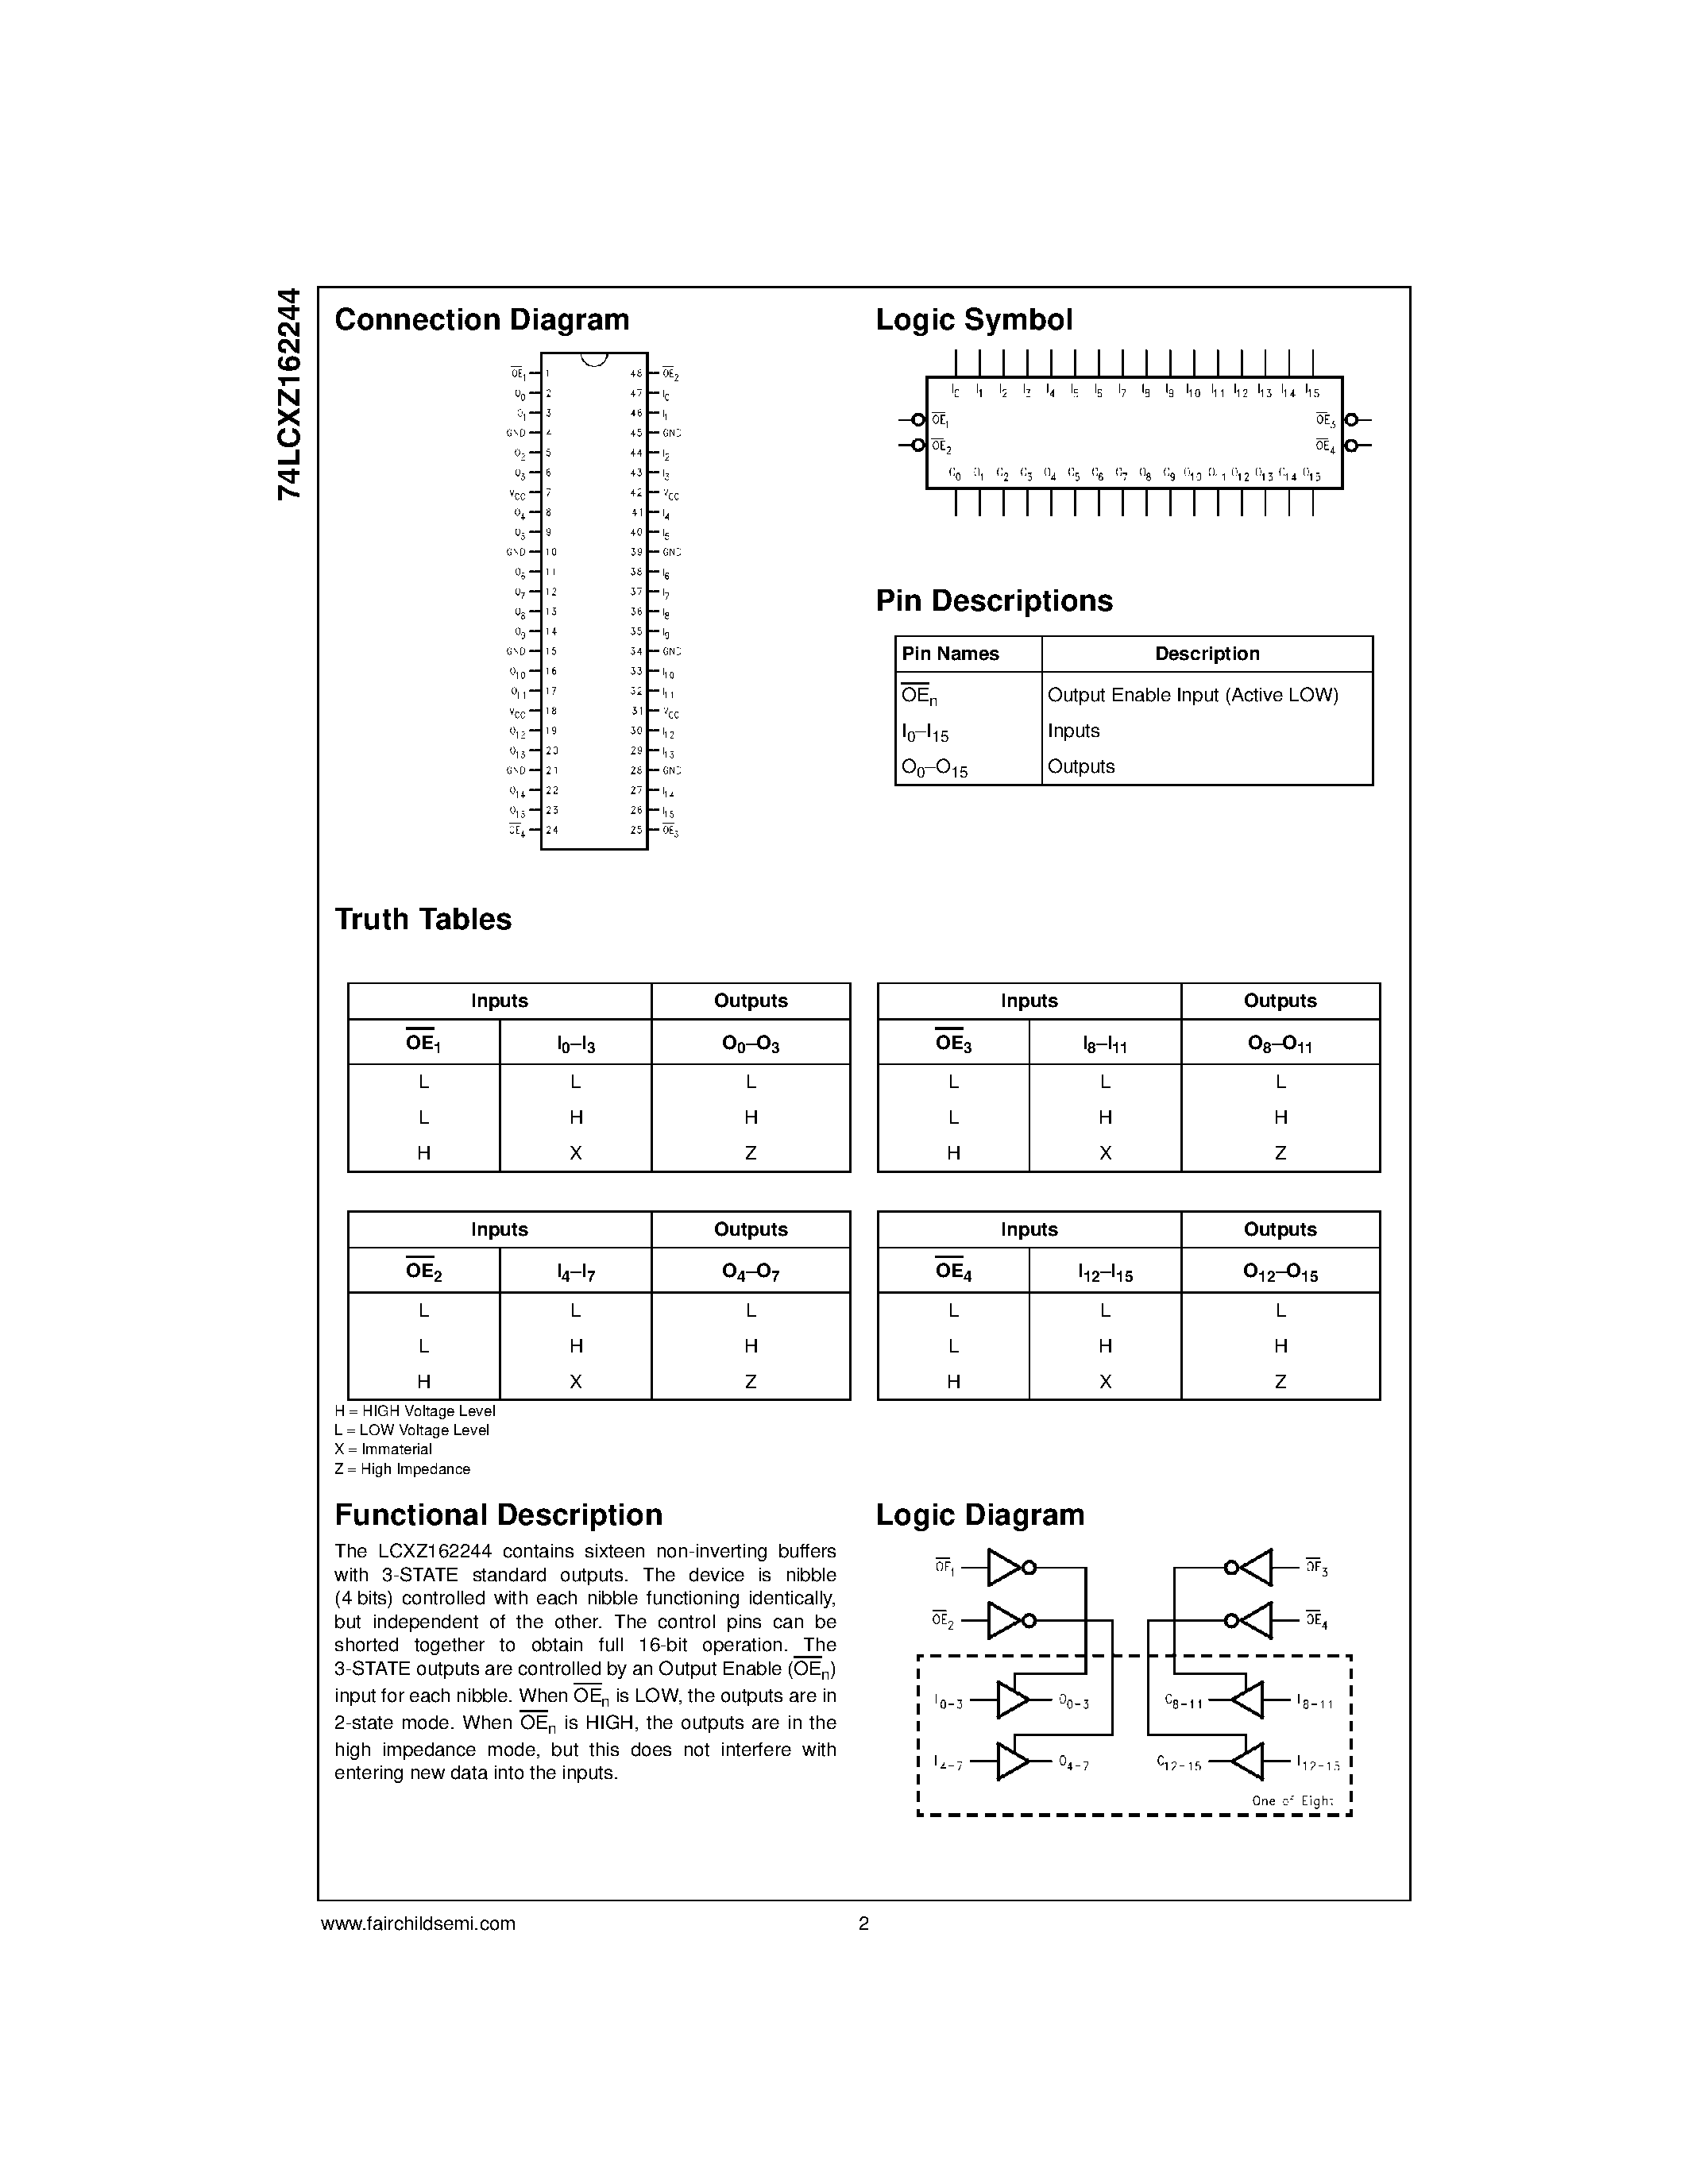 Datasheet 74LCXZ162244MTX - Low Voltage 16-Bit Buffer/Line Driver with 5V Tolerant Inputs/Outputs and 26 Series Resistors in the Outputs page 2